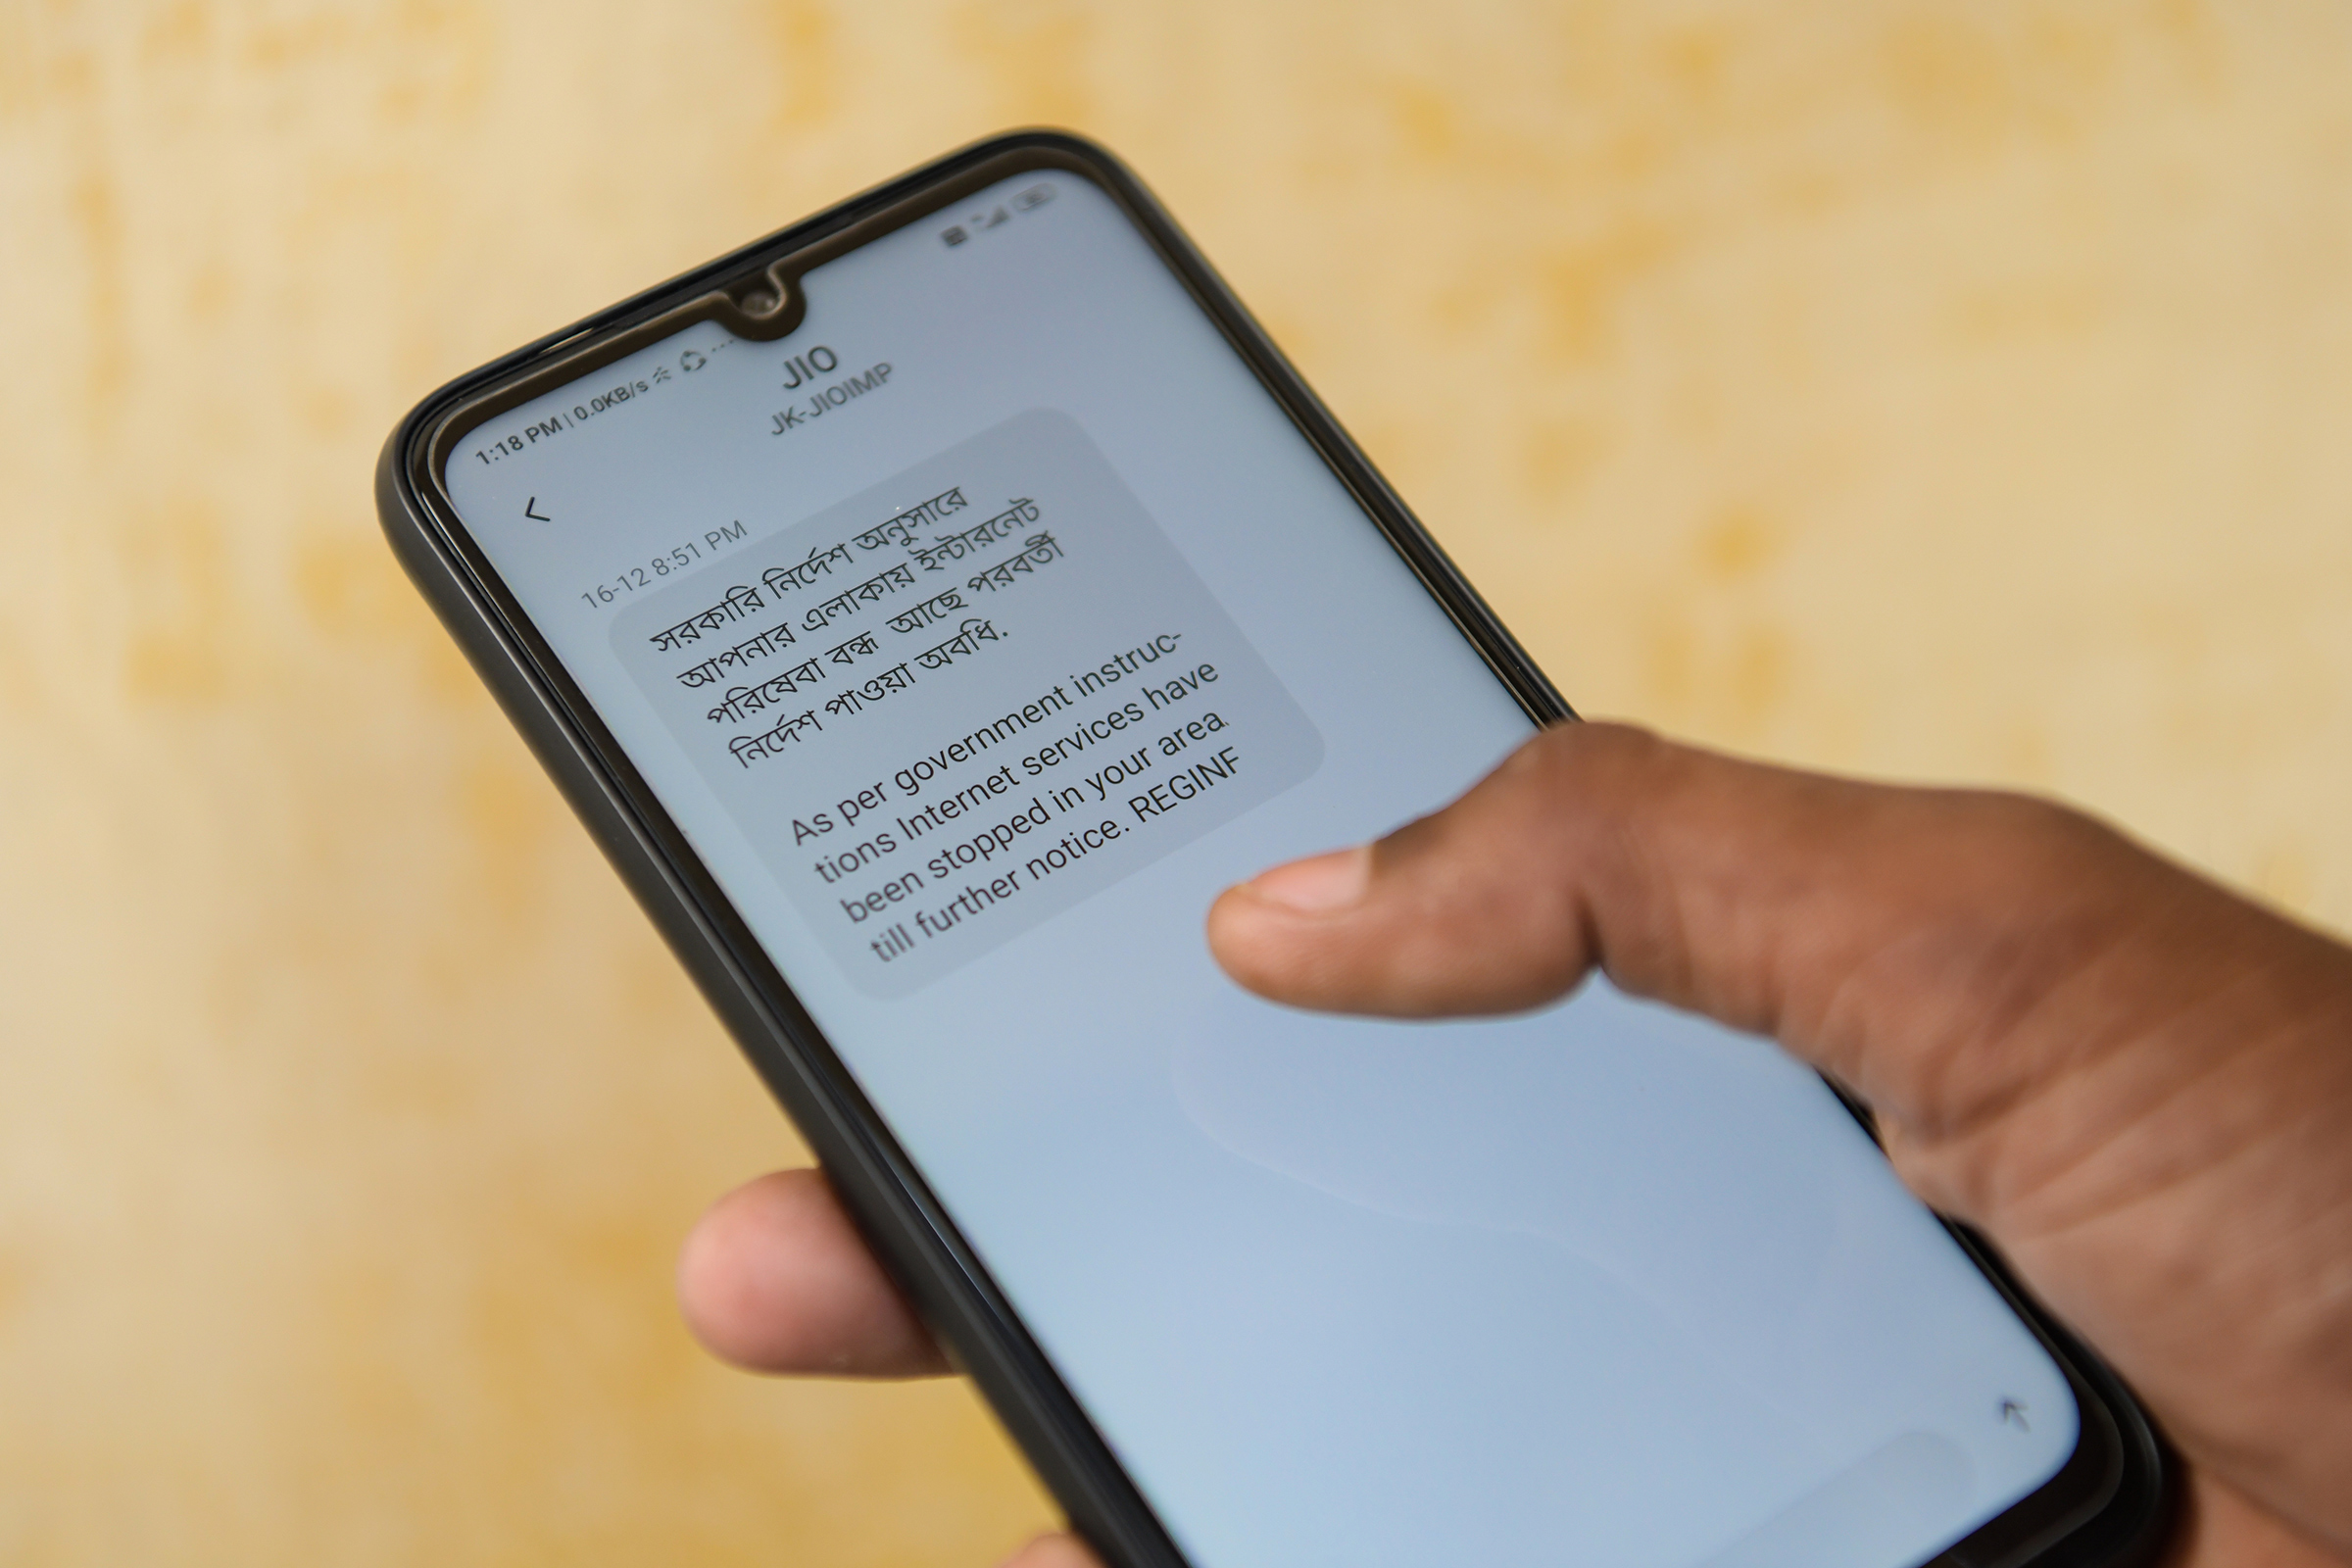 A notification message is displayed on a smartphone regarding internet service being suspended as per the government instructions in Kolkata, on Dec. 17, 2019. According to officials, the government has shut down Internet services in several districts to prevent circulation of fake news on the nationwide protest against NRC, CAB.